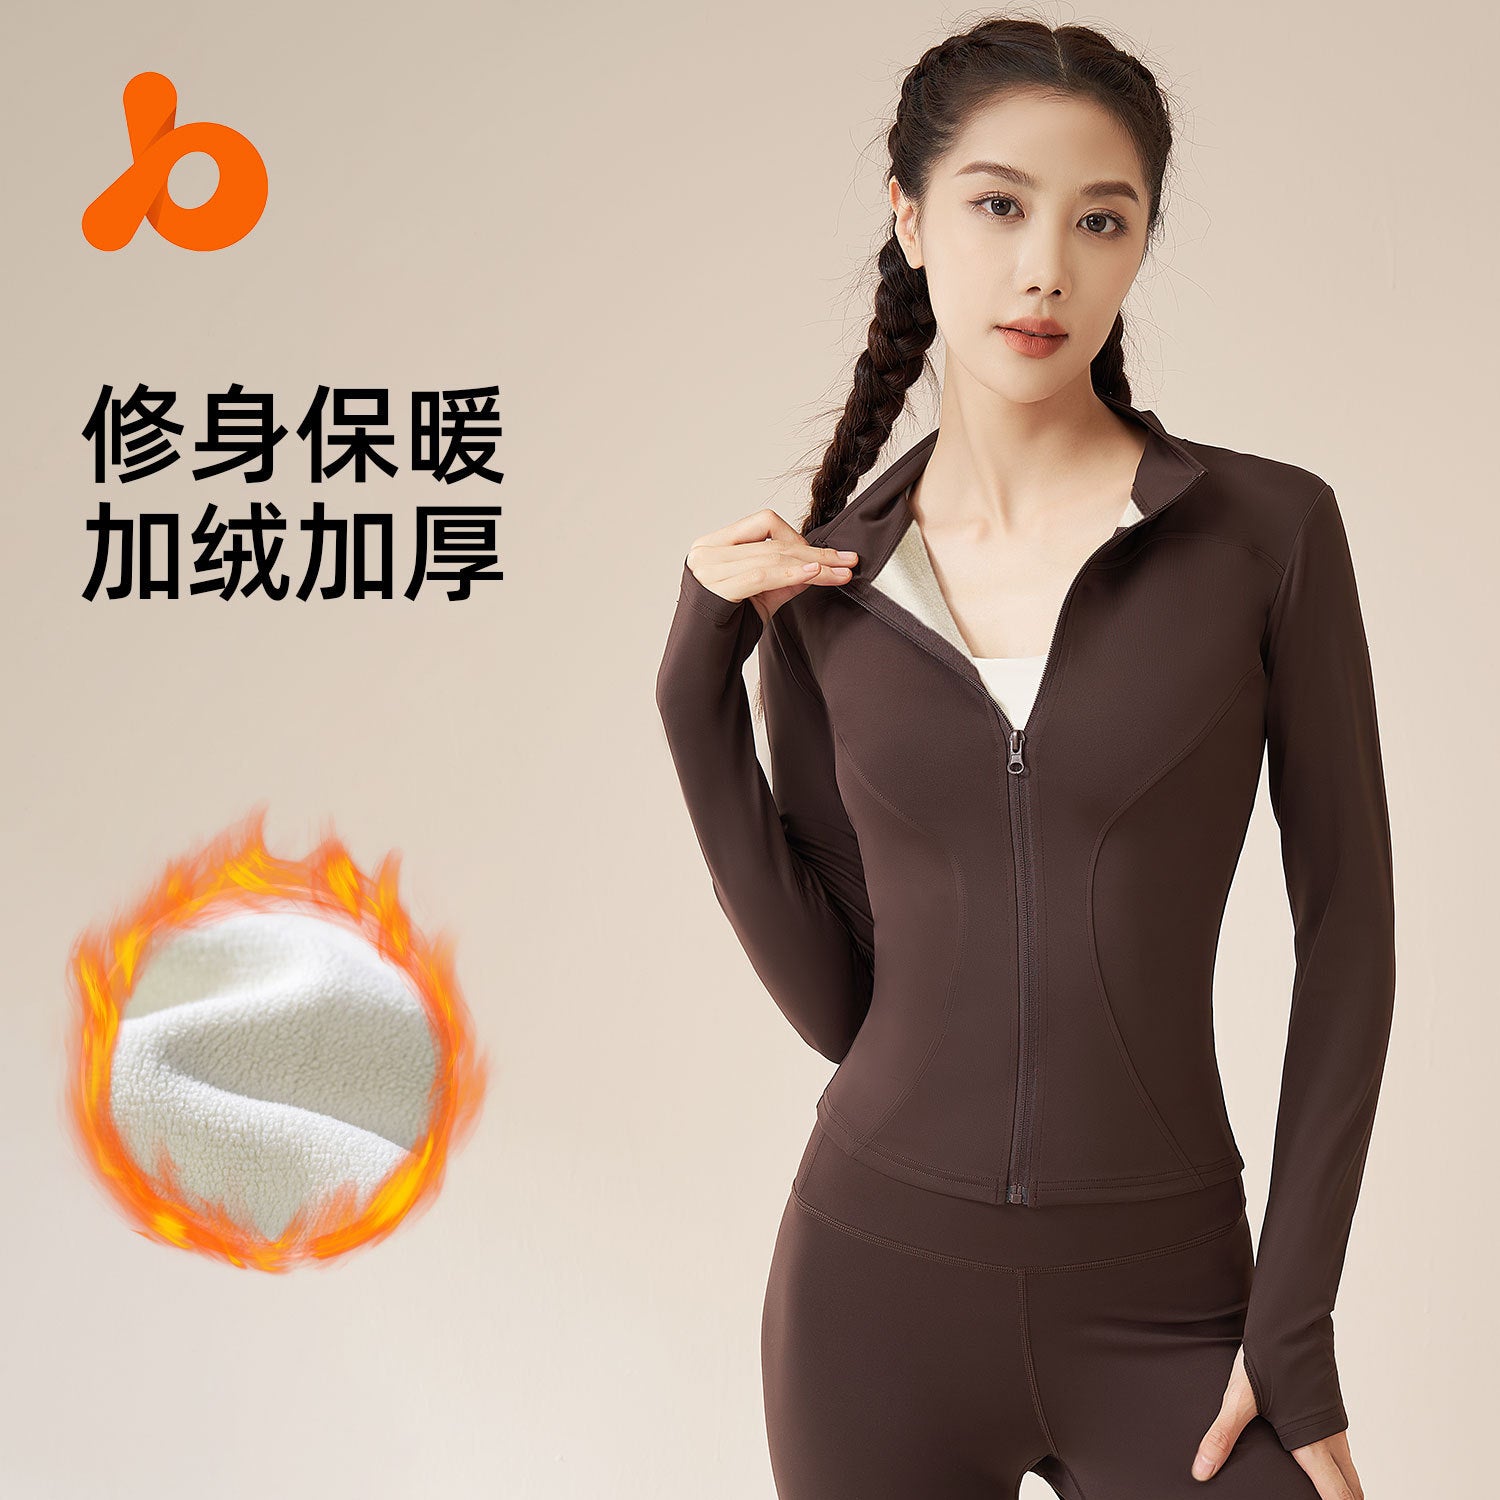 Juyi Tang autumn and winter plush yoga suit top, thickened warmth, fitness suit, casual slimming running sports jacket